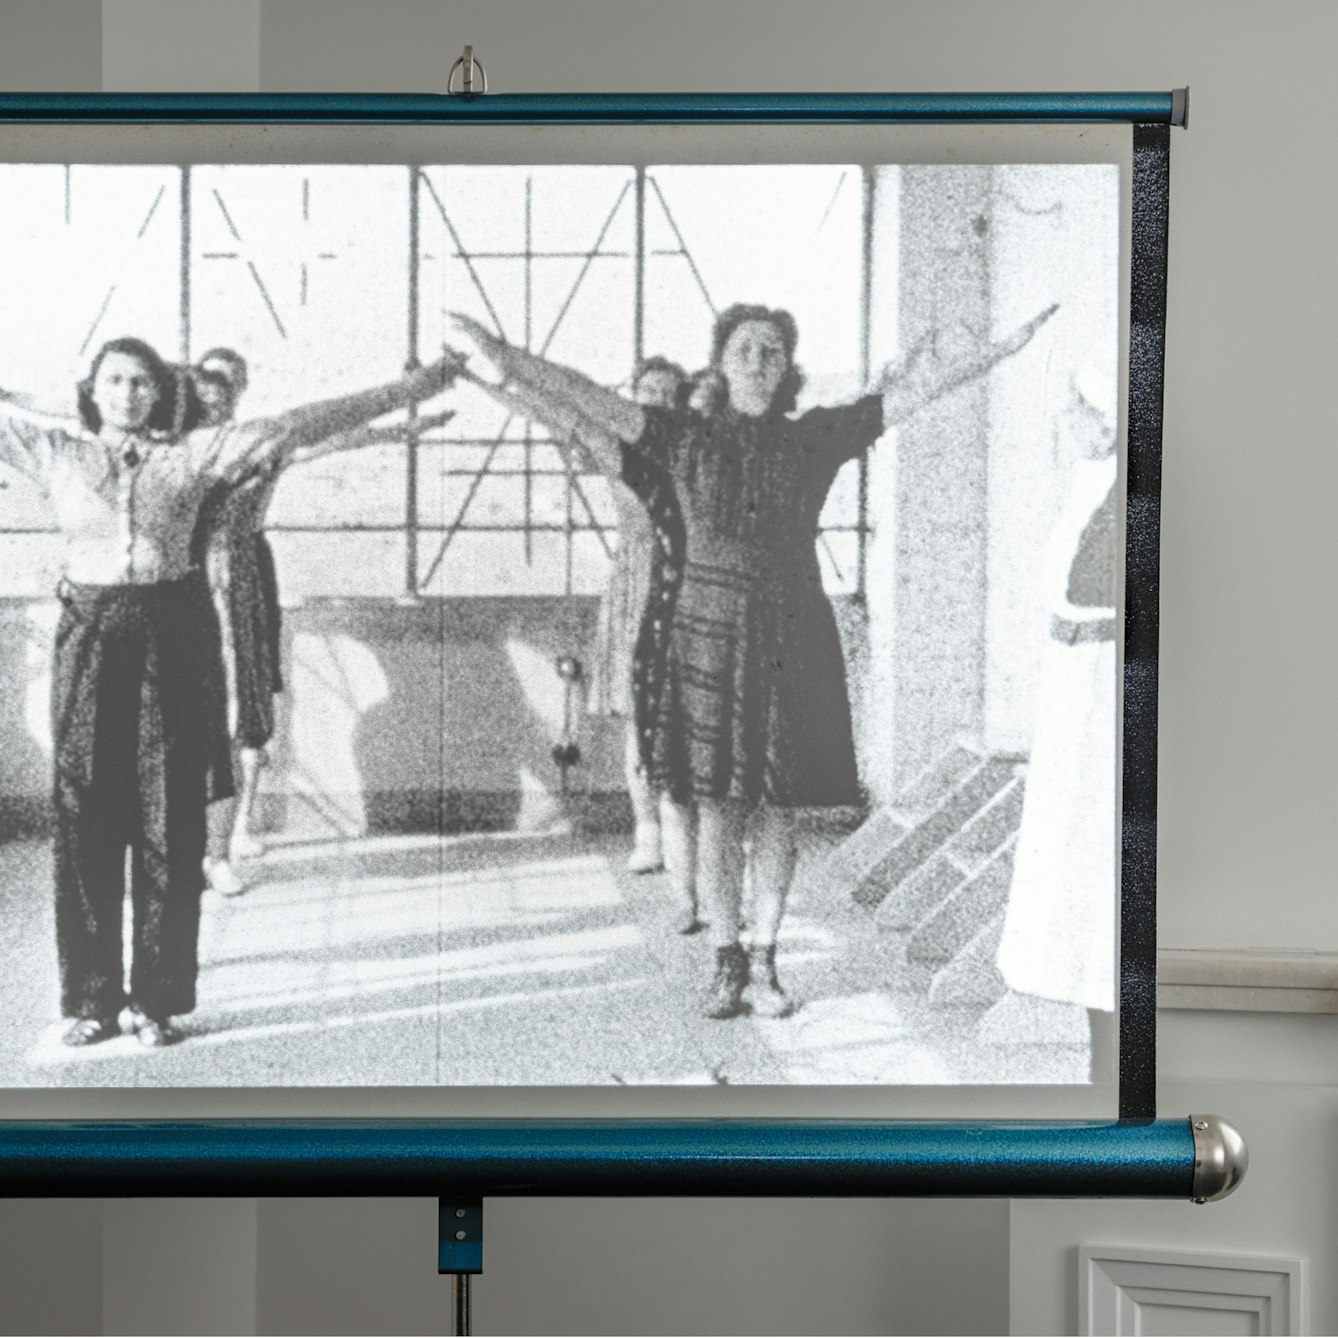 Photograph of a Hunter Starlight projector screen in the corner of room by a window recess. On the screen is an still from a film, showing two lines of expectant mothers with their arms raised as part of an excessive class. To the right of the frame a nurse is just visible.